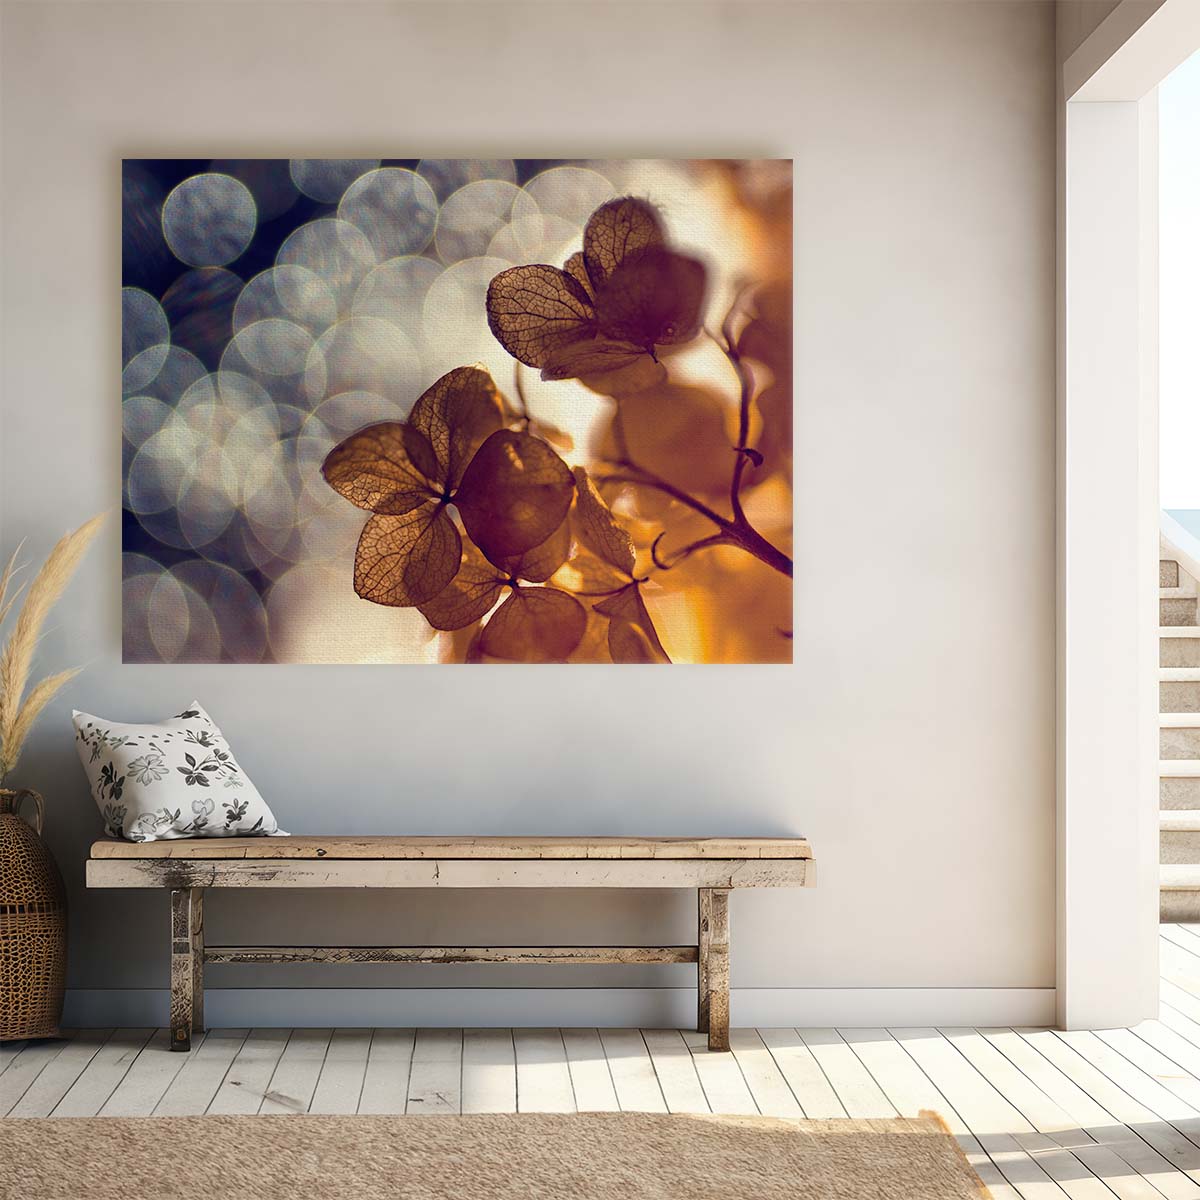 Golden Autumn Leaves Macro Bokeh Floral Wall Art by Luxuriance Designs. Made in USA.